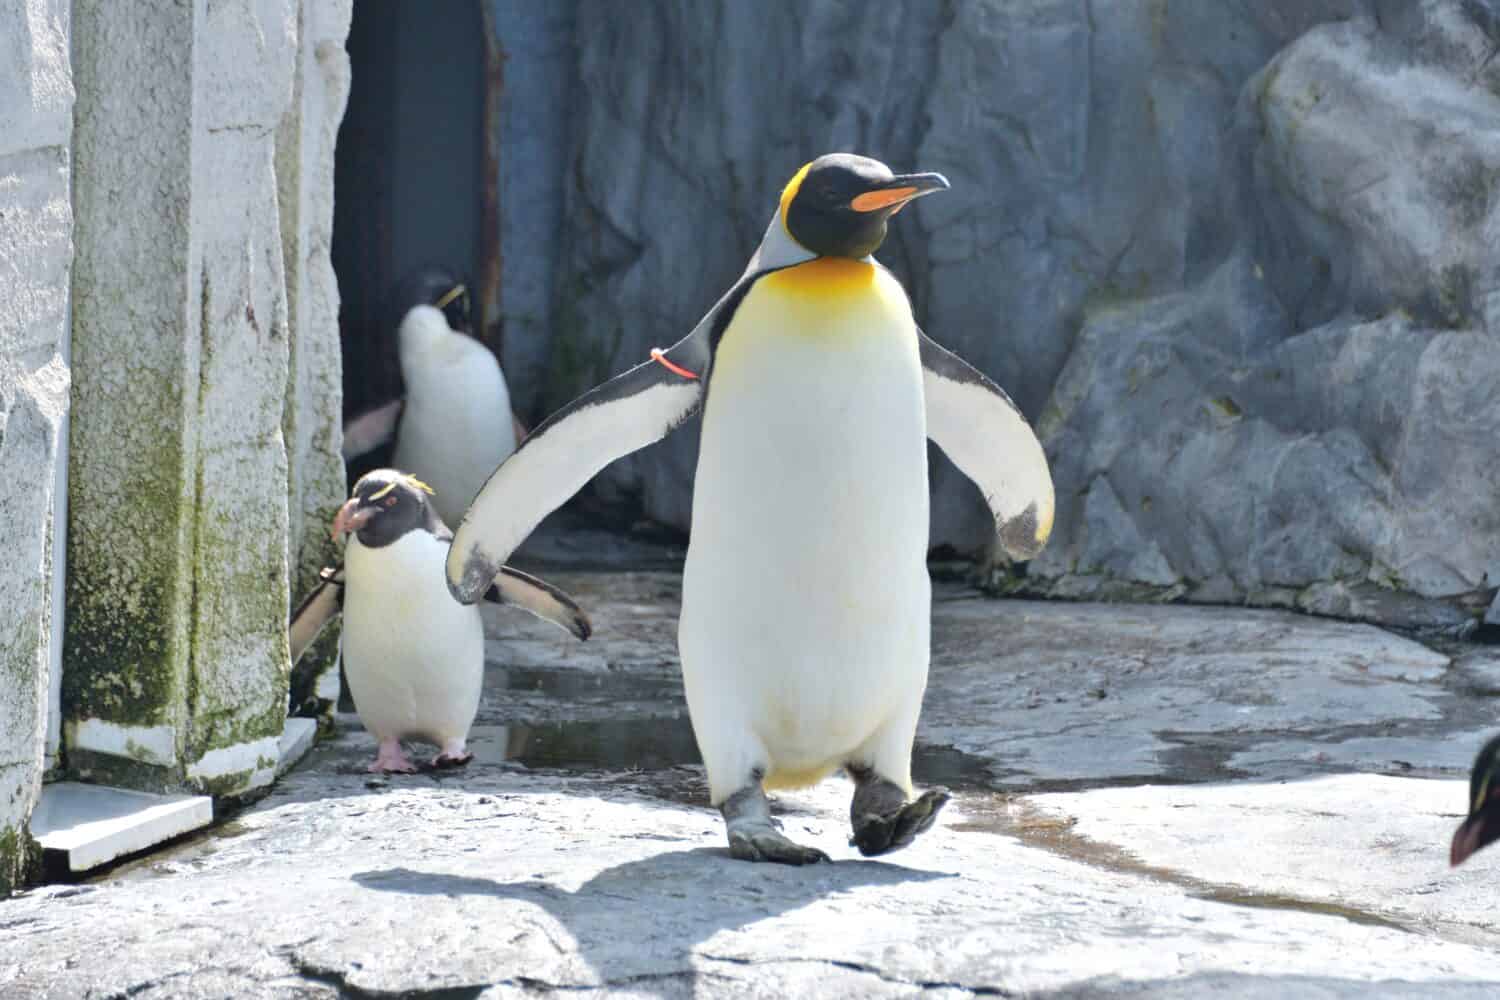 Photographing King Penguins at the Zoo